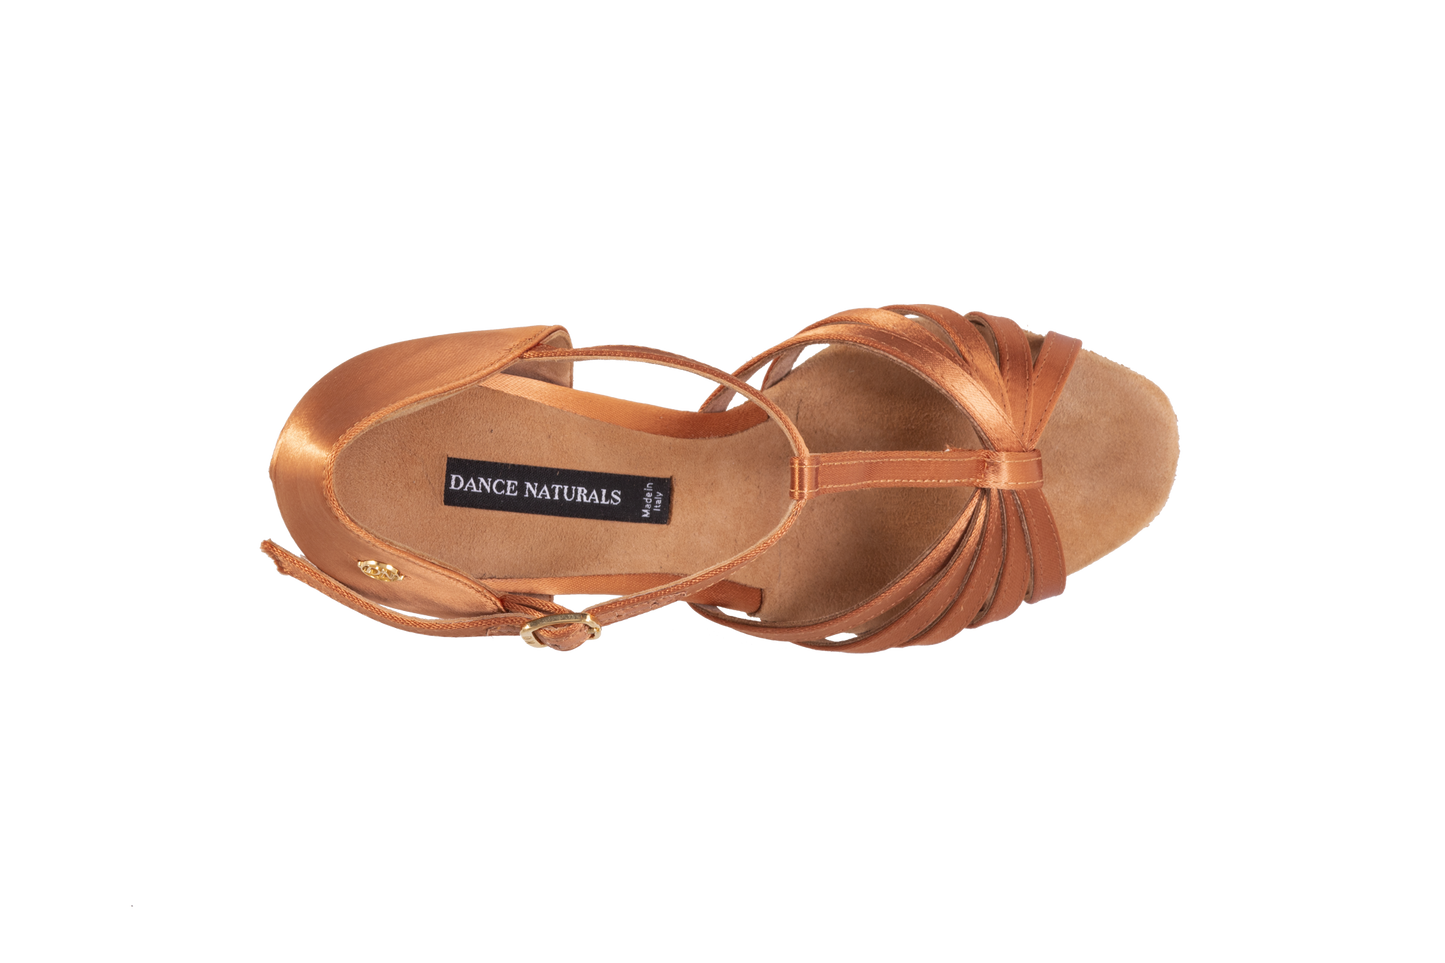 Dance Naturals Voga Latin Dance Shoe with T-Bar Strap Available in Brown or Black Satin